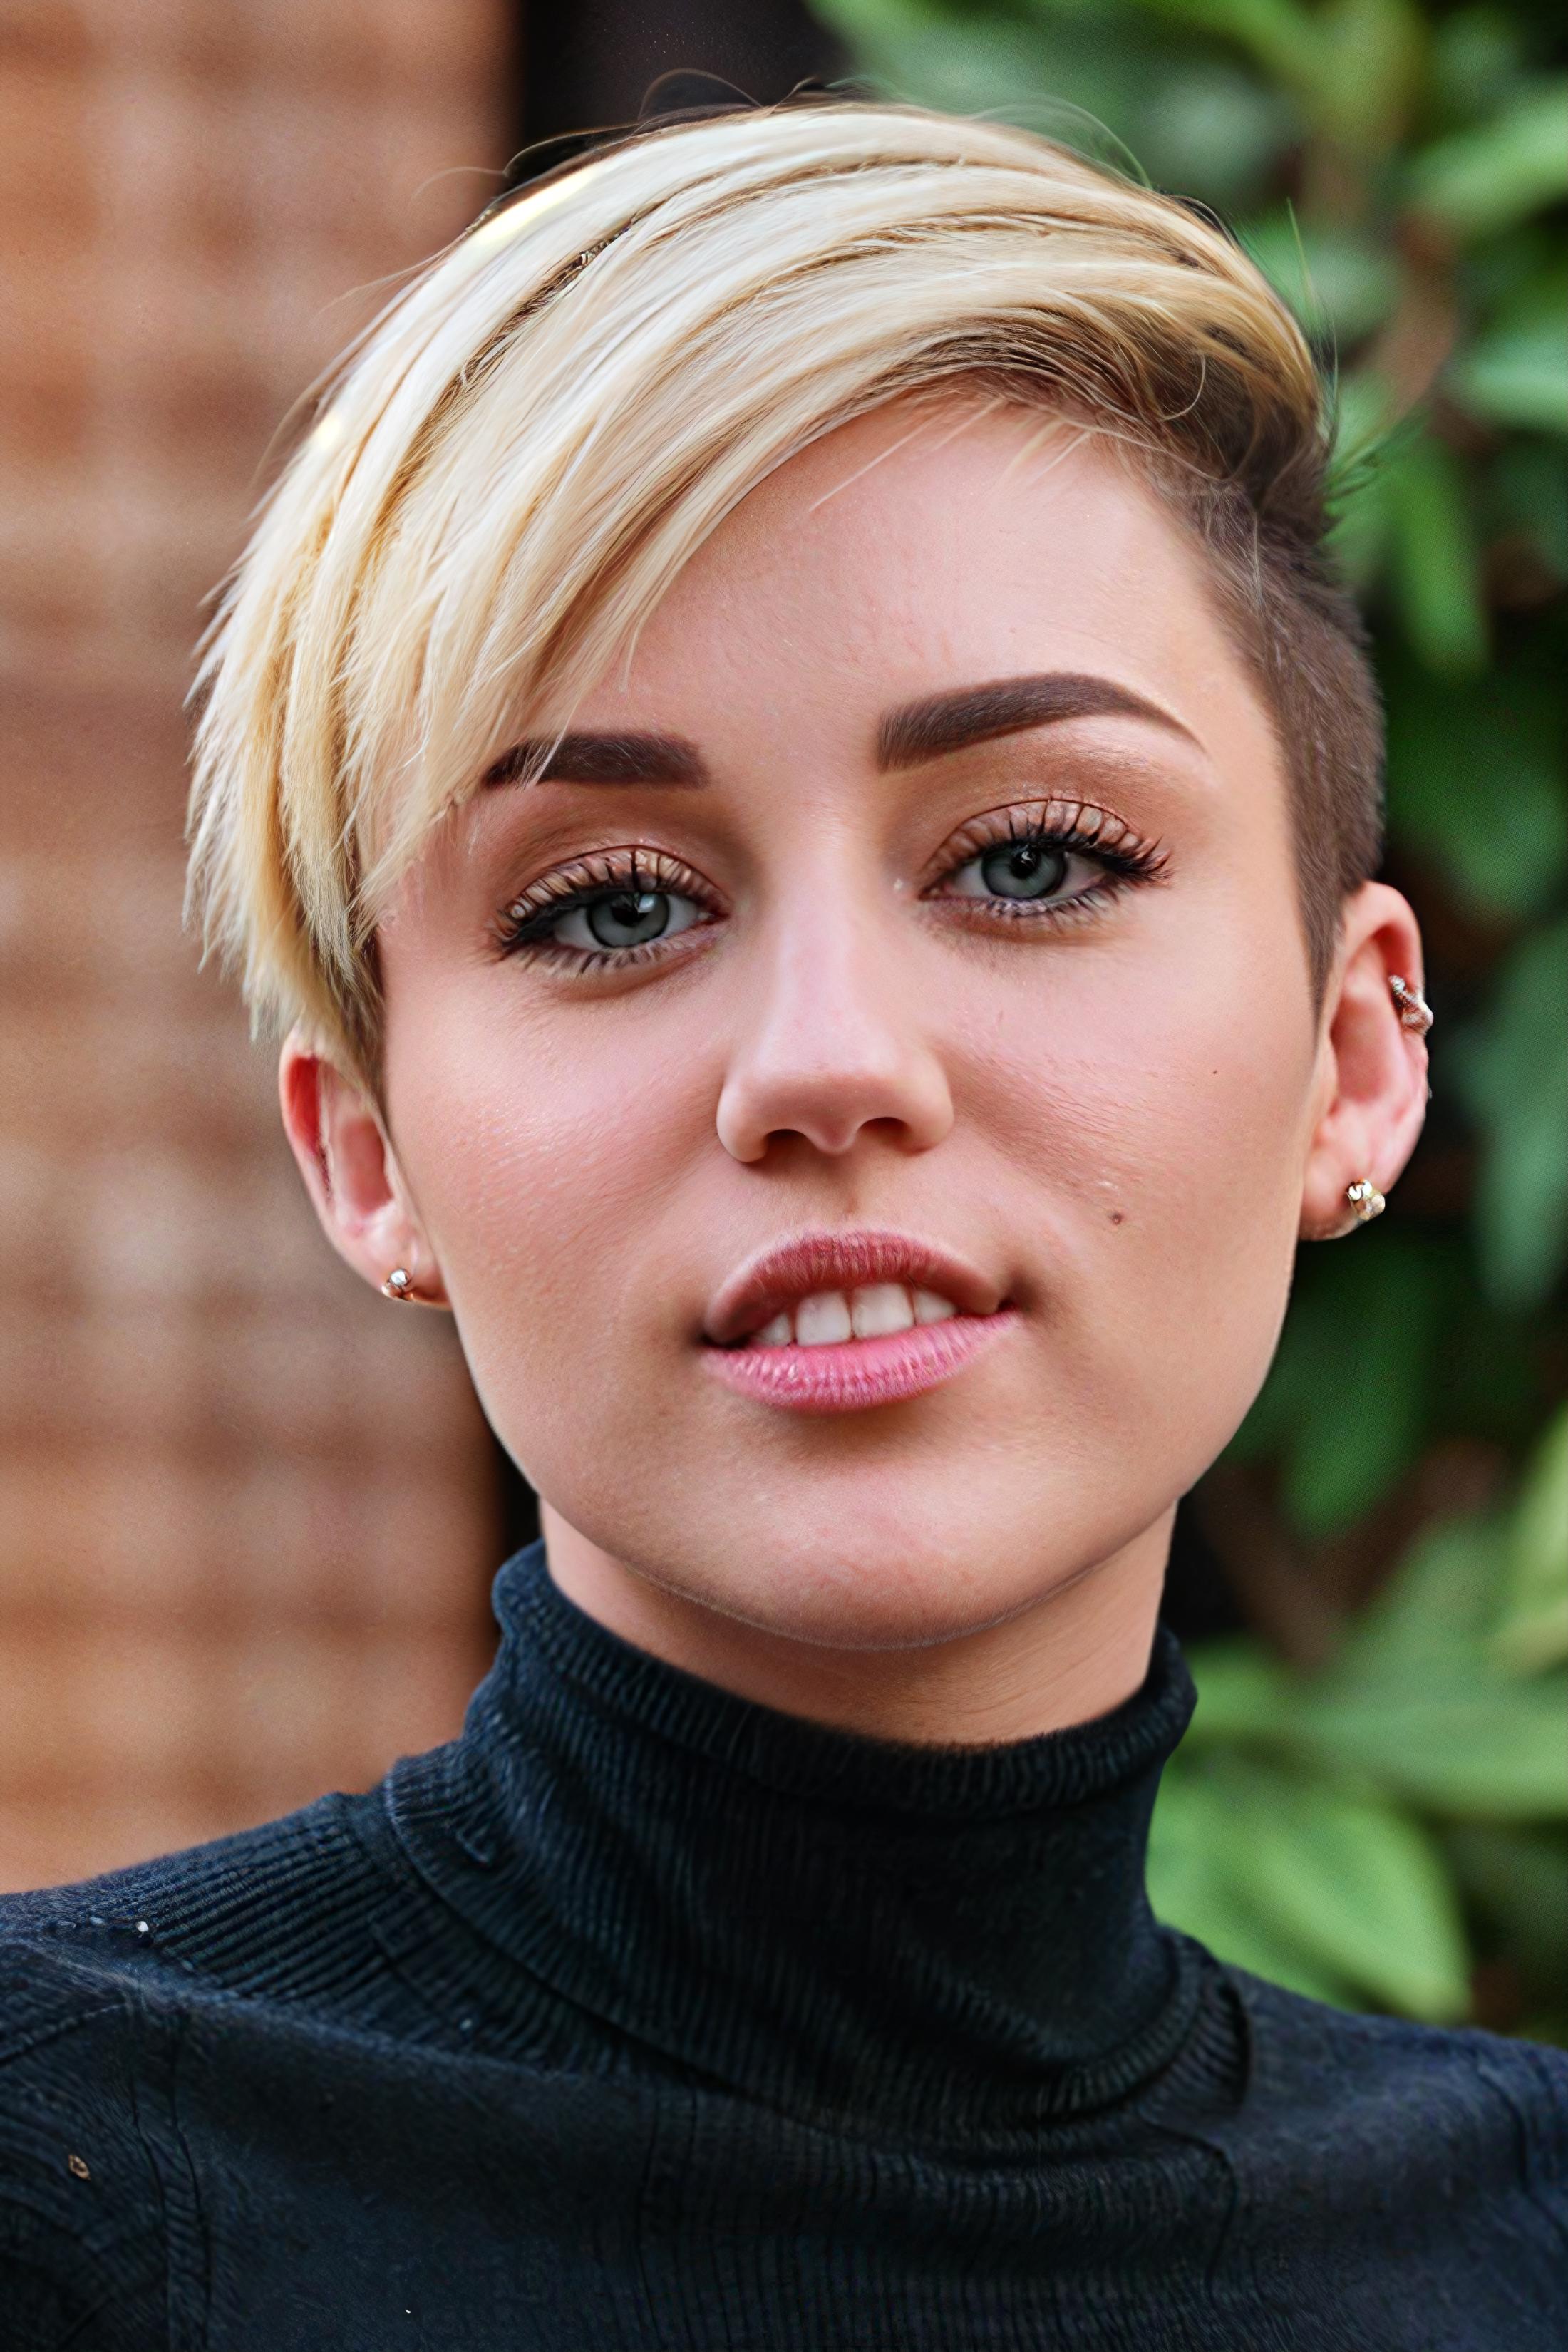 Miley Cyrus image by __2_